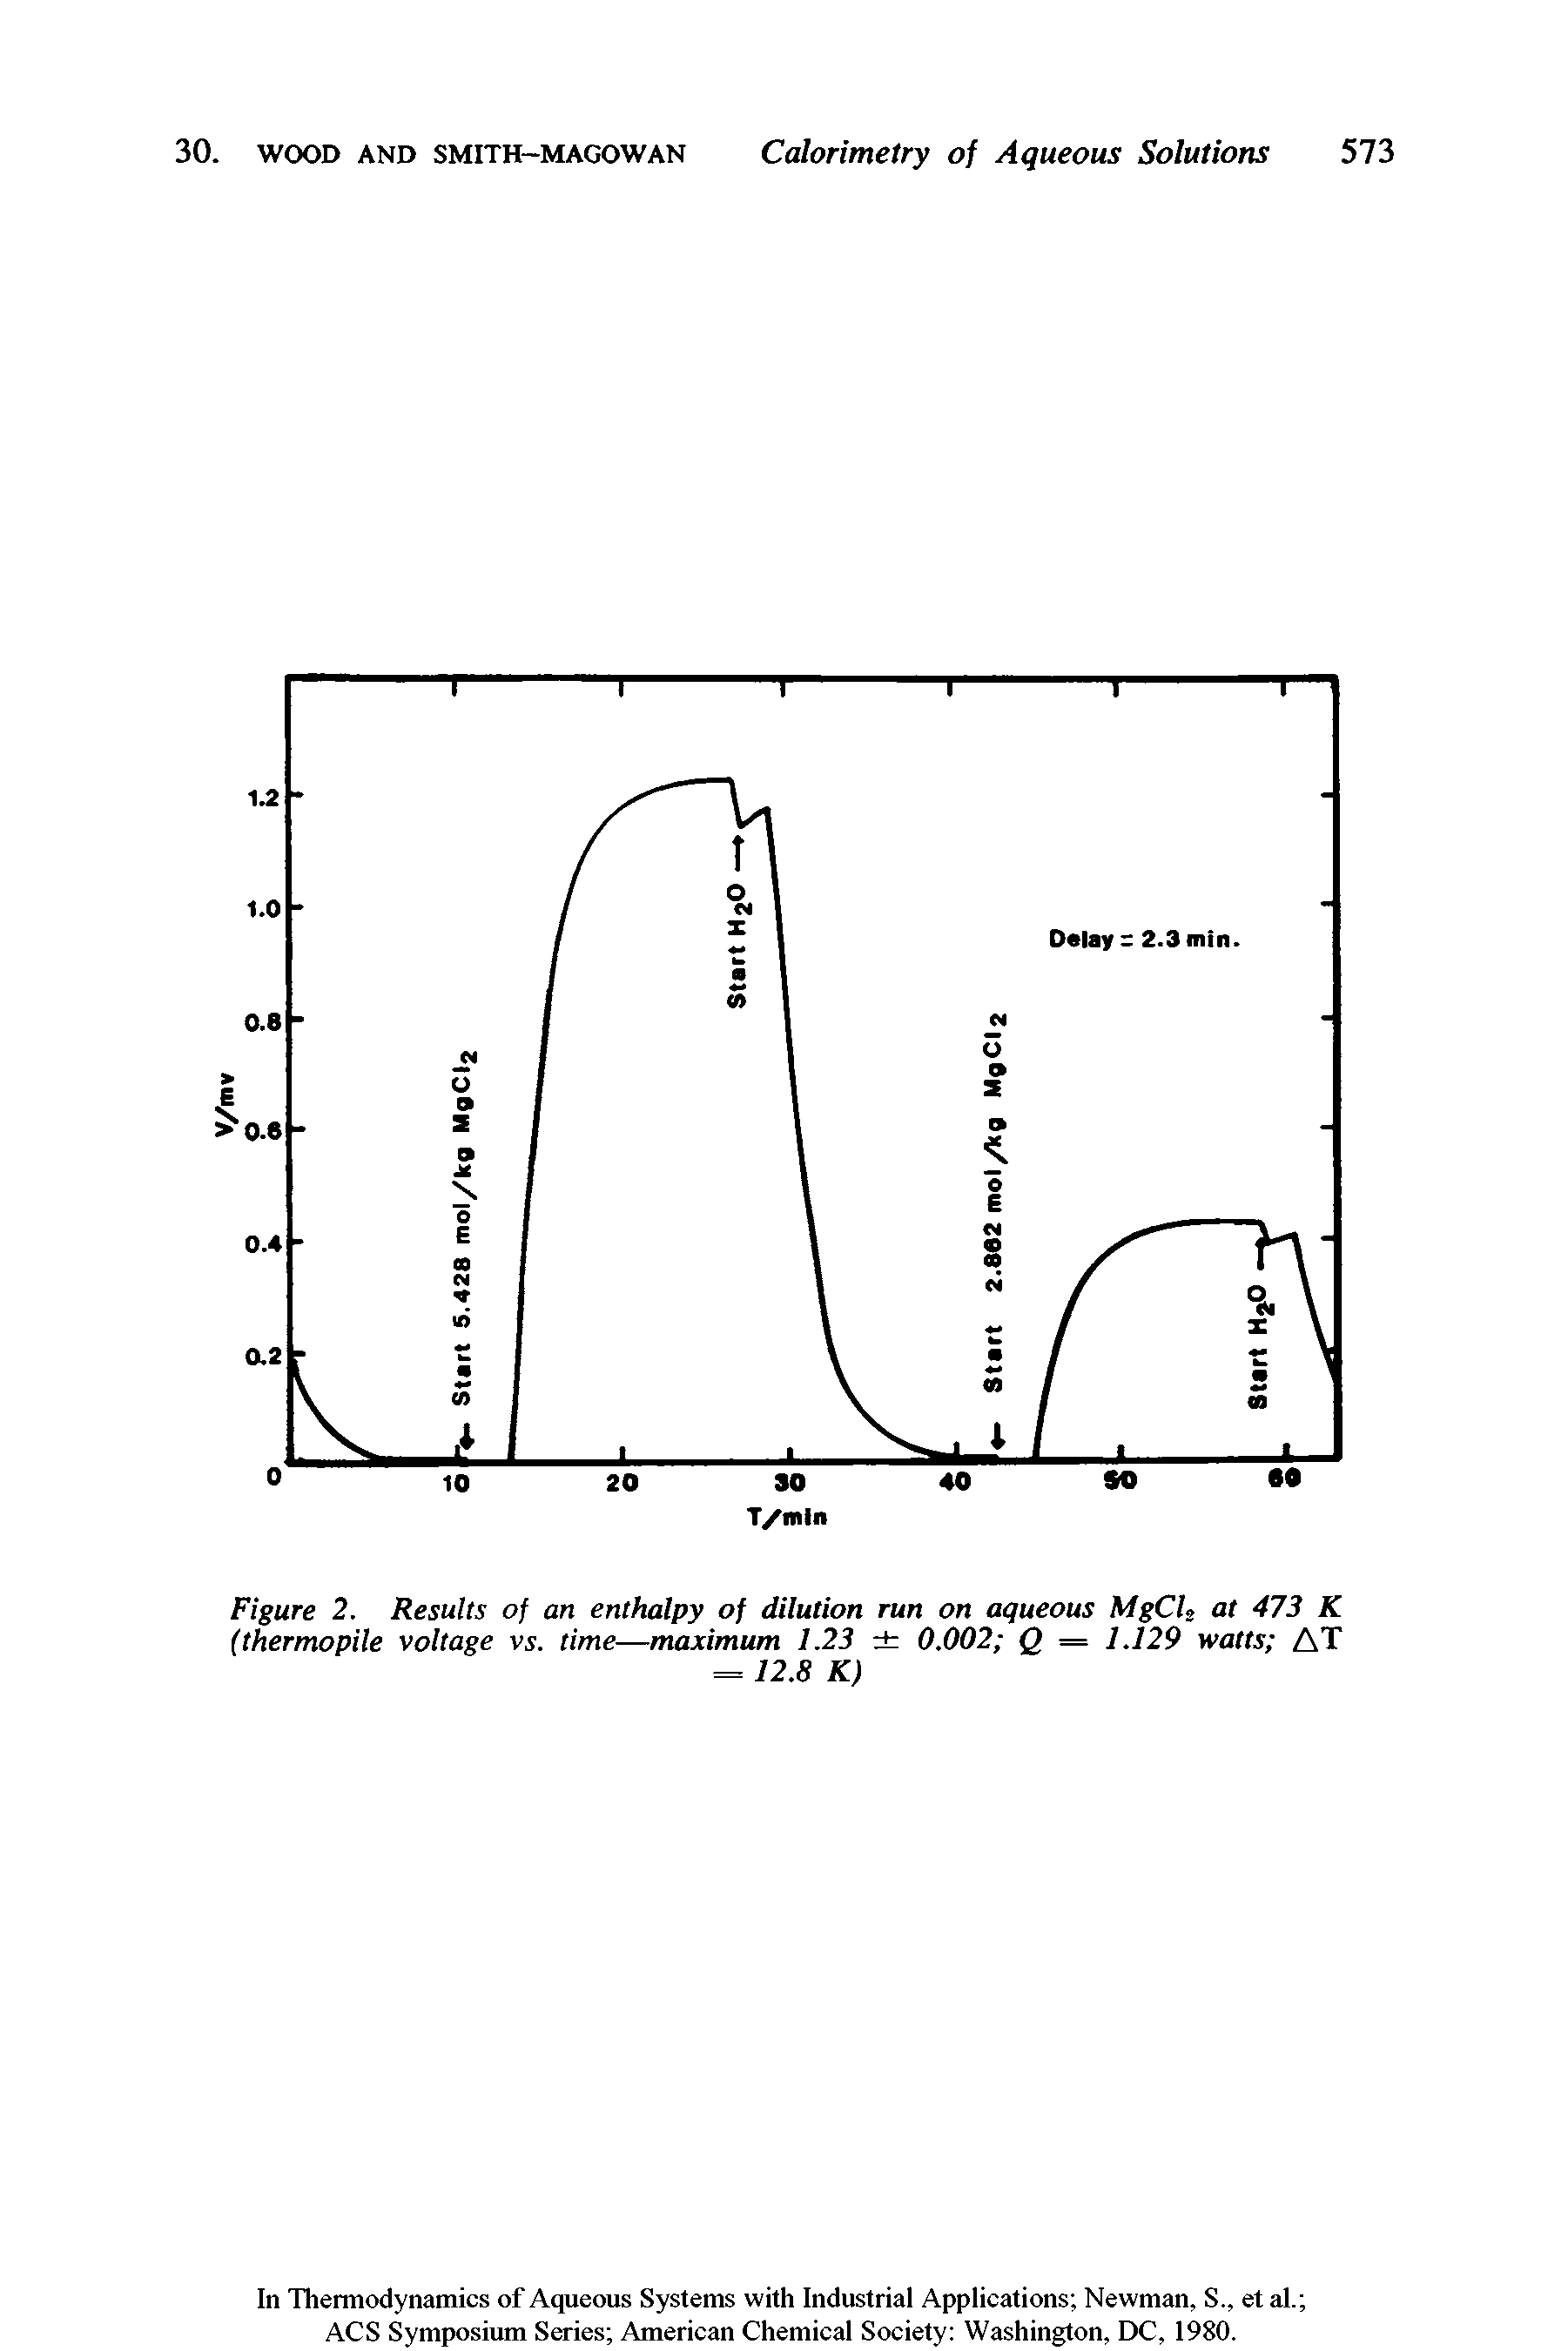 Figure 2. Results of an enthalpy of dilution run on aqueous MgCh at 473 K (thermopile voltage vs. time—maximum 1.23 0.002 Q = 1.129 watts AT...